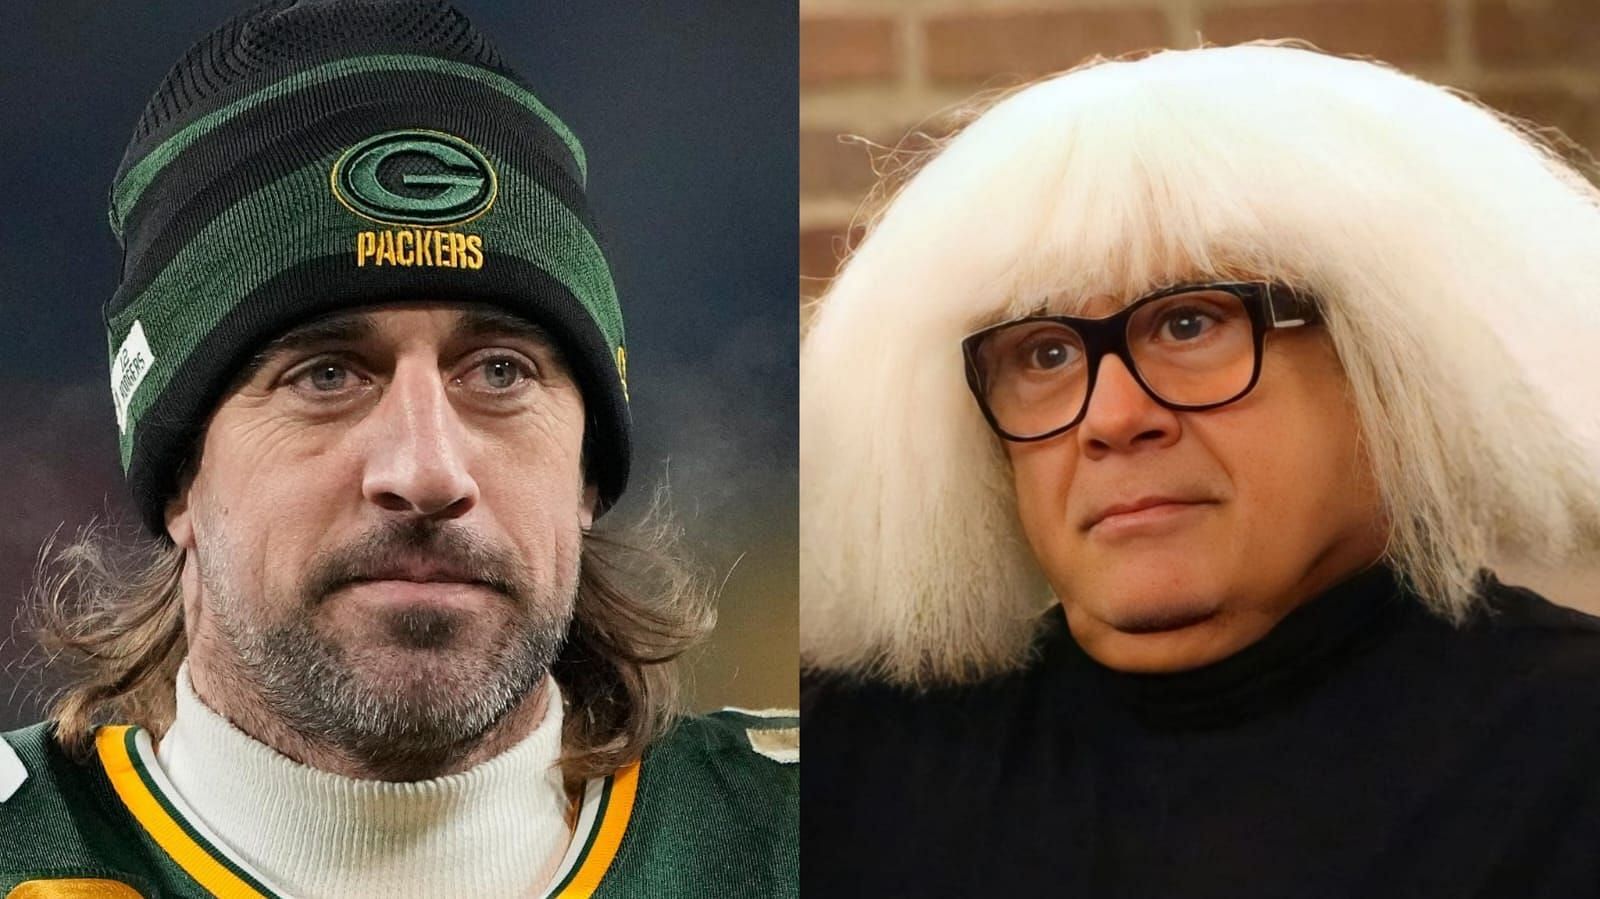 Aaron Rodgers (left) has been catching some heat over his recent comments